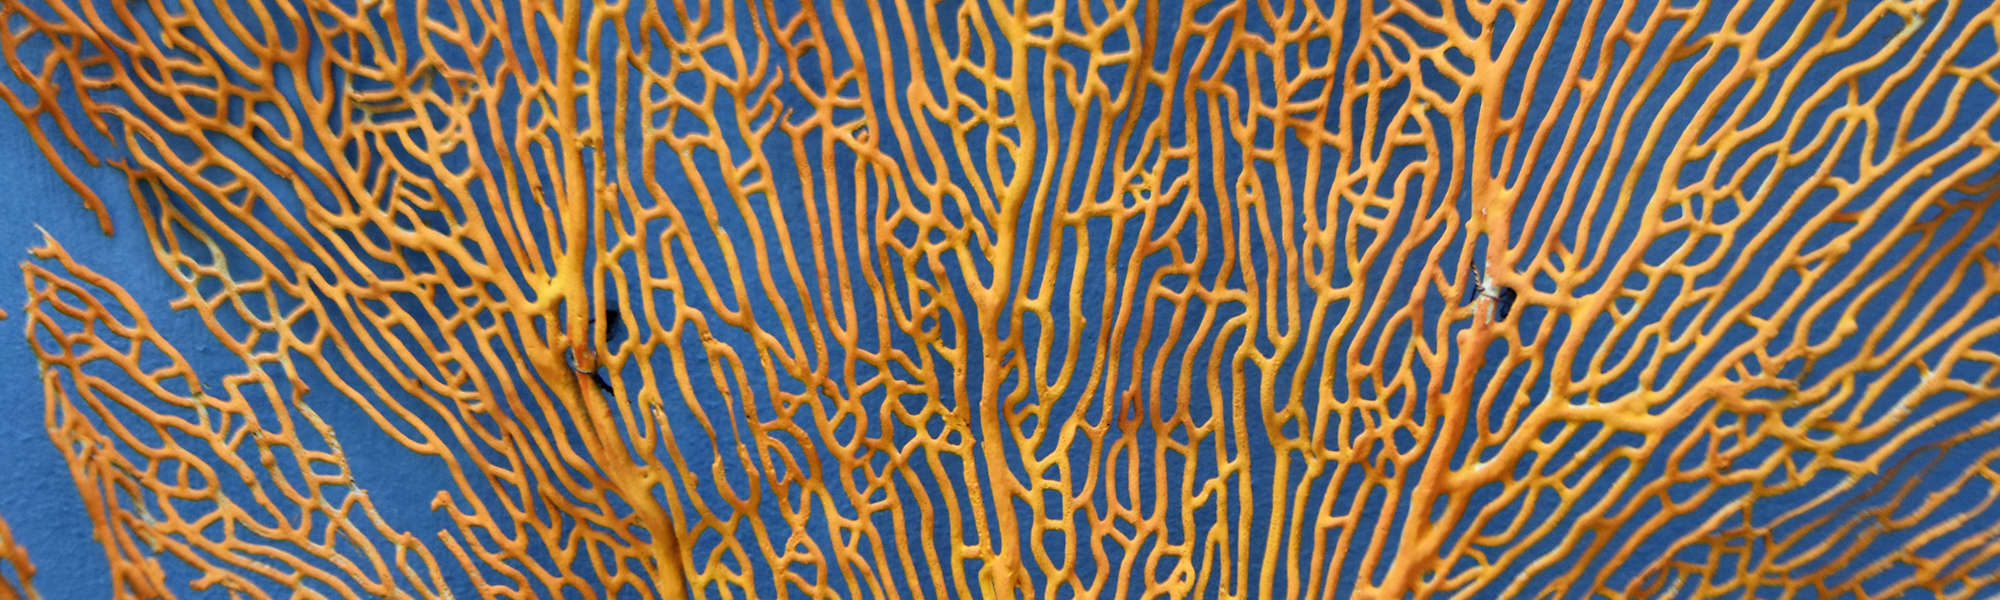 Coral abstract texture yellow